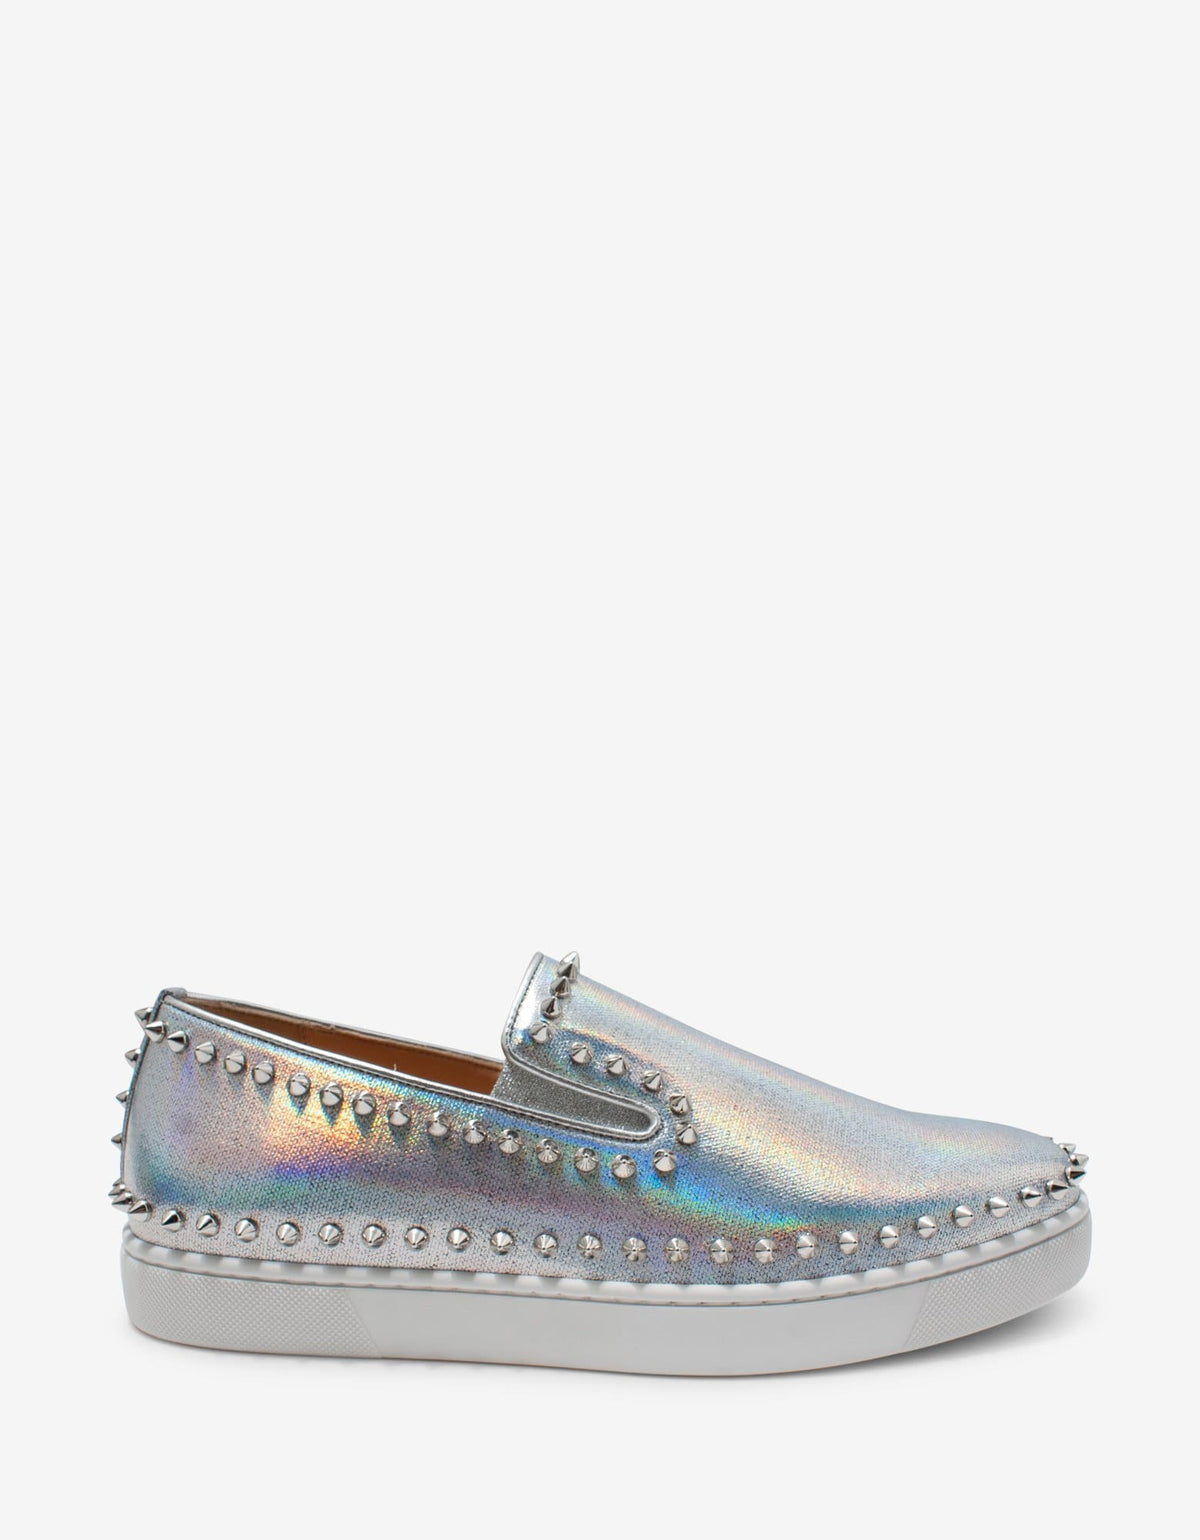 Christian Louboutin Pik Boat Silver Coated Canvas Trainers -